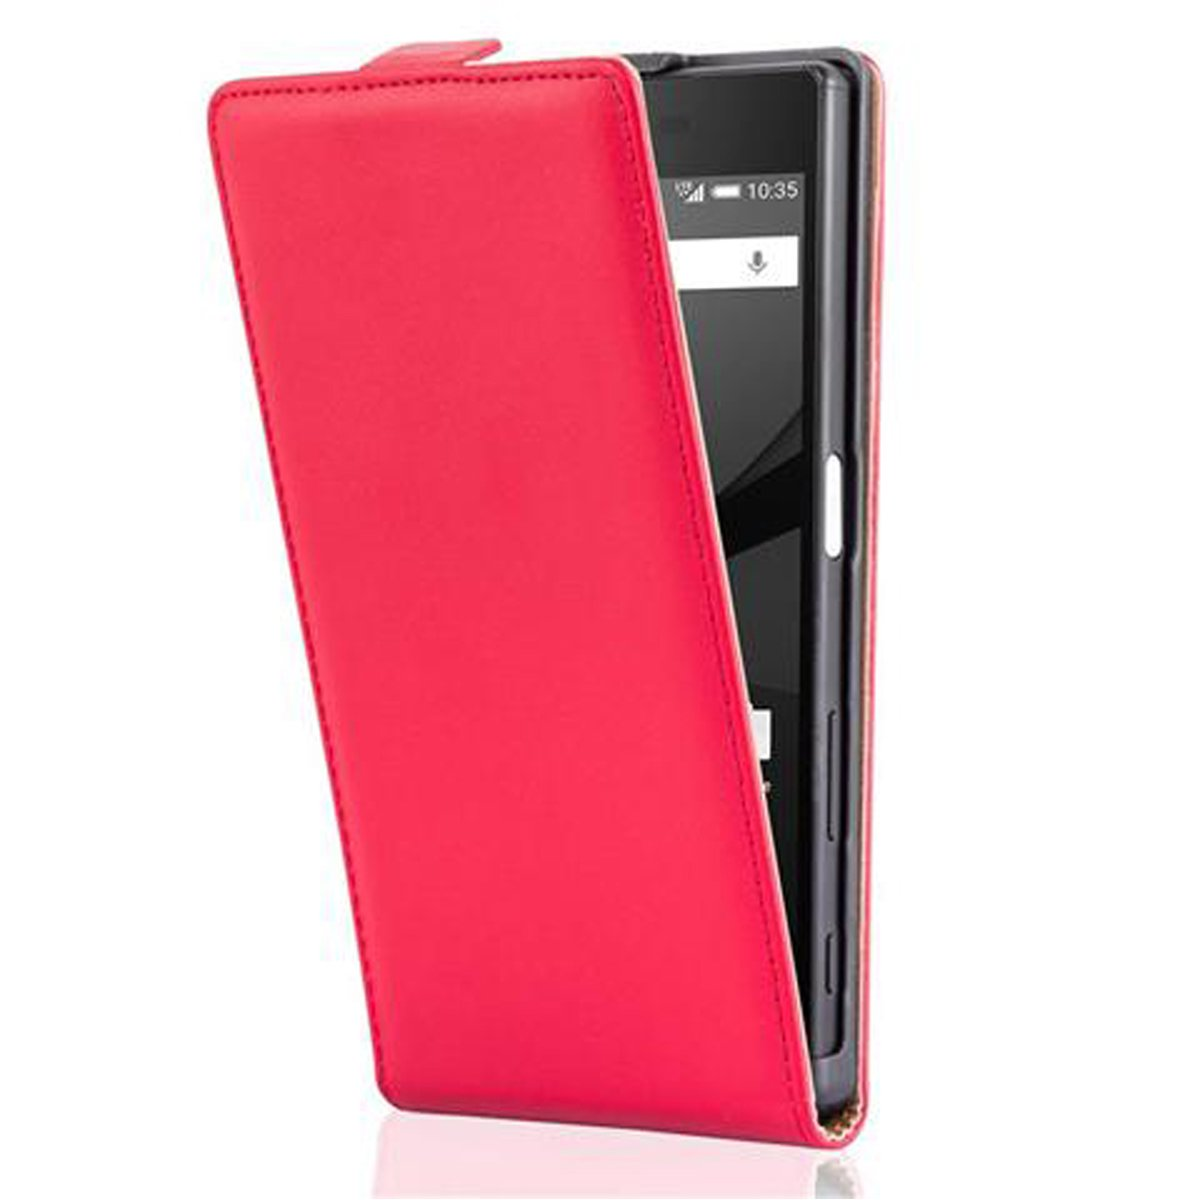 CHILI Style, Flip Handyhülle Cover, Sony, Flip CADORABO Z5, Xperia ROT im